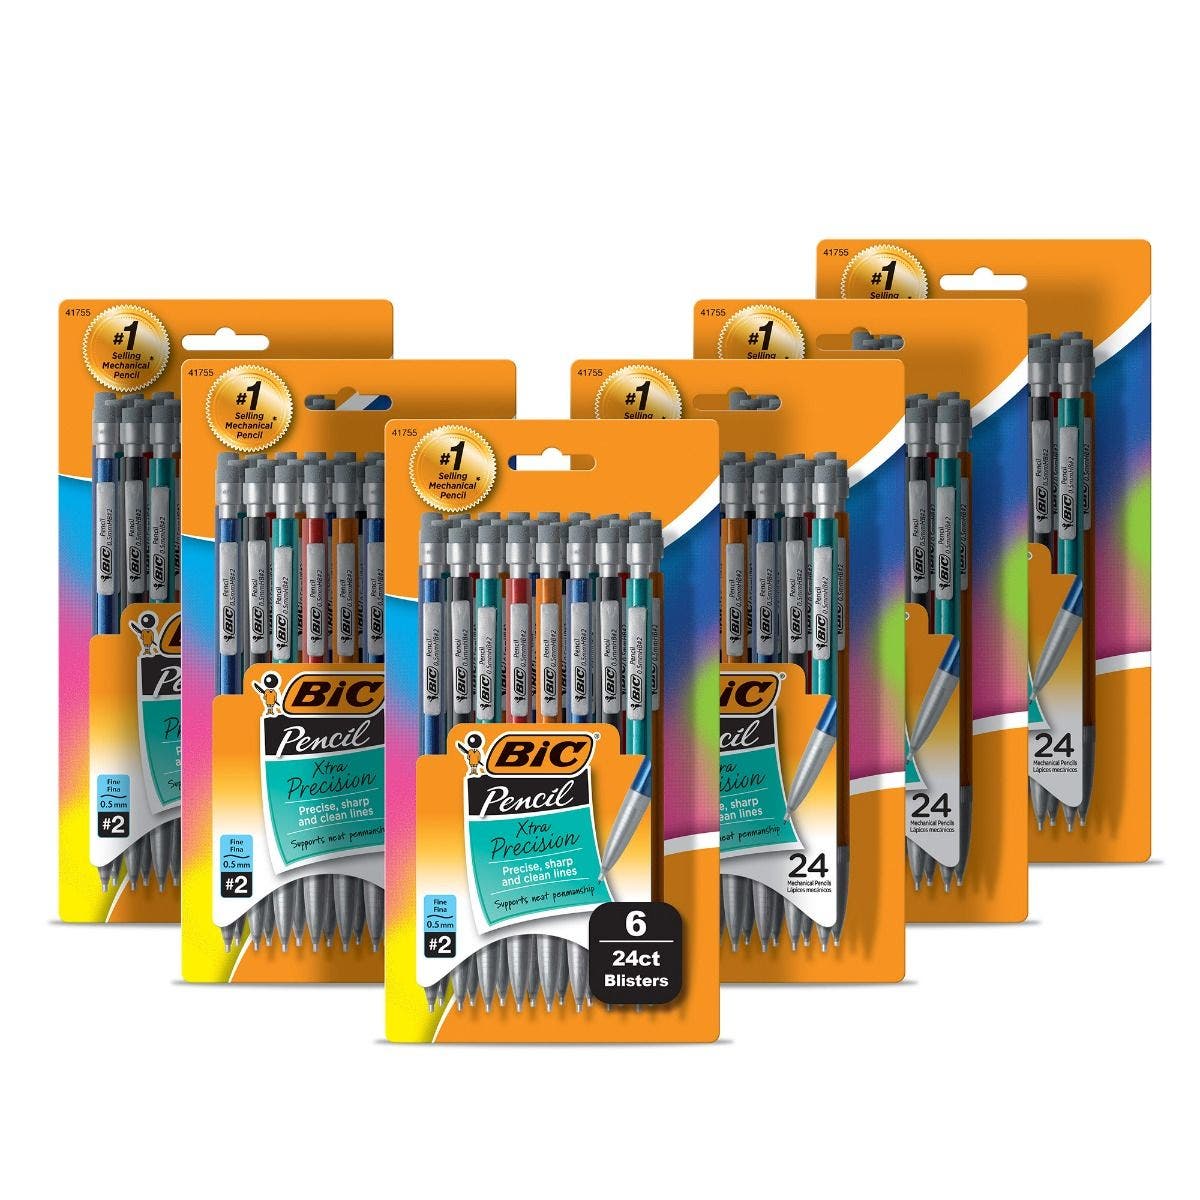 Bic Graphite Leads - 0.5 mm HB, 2 Blister Packs of 12 Leads